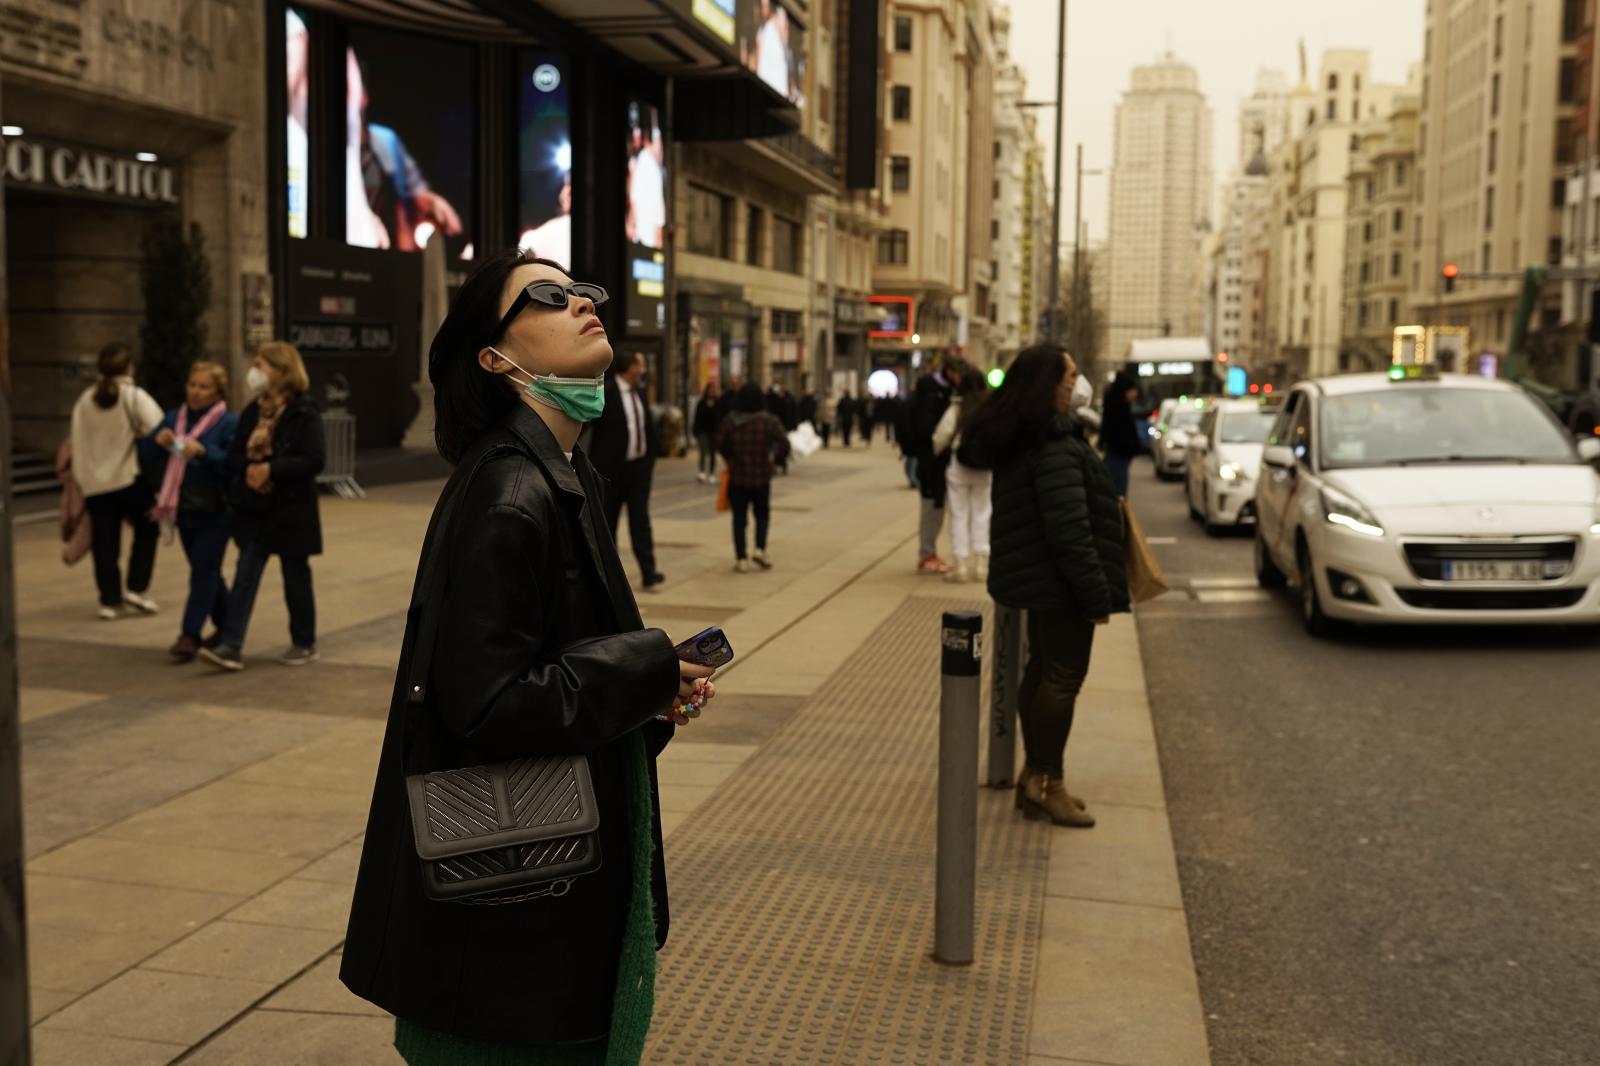 Image from Overview - A woman observes the sky over Madrid on Gran Vía....